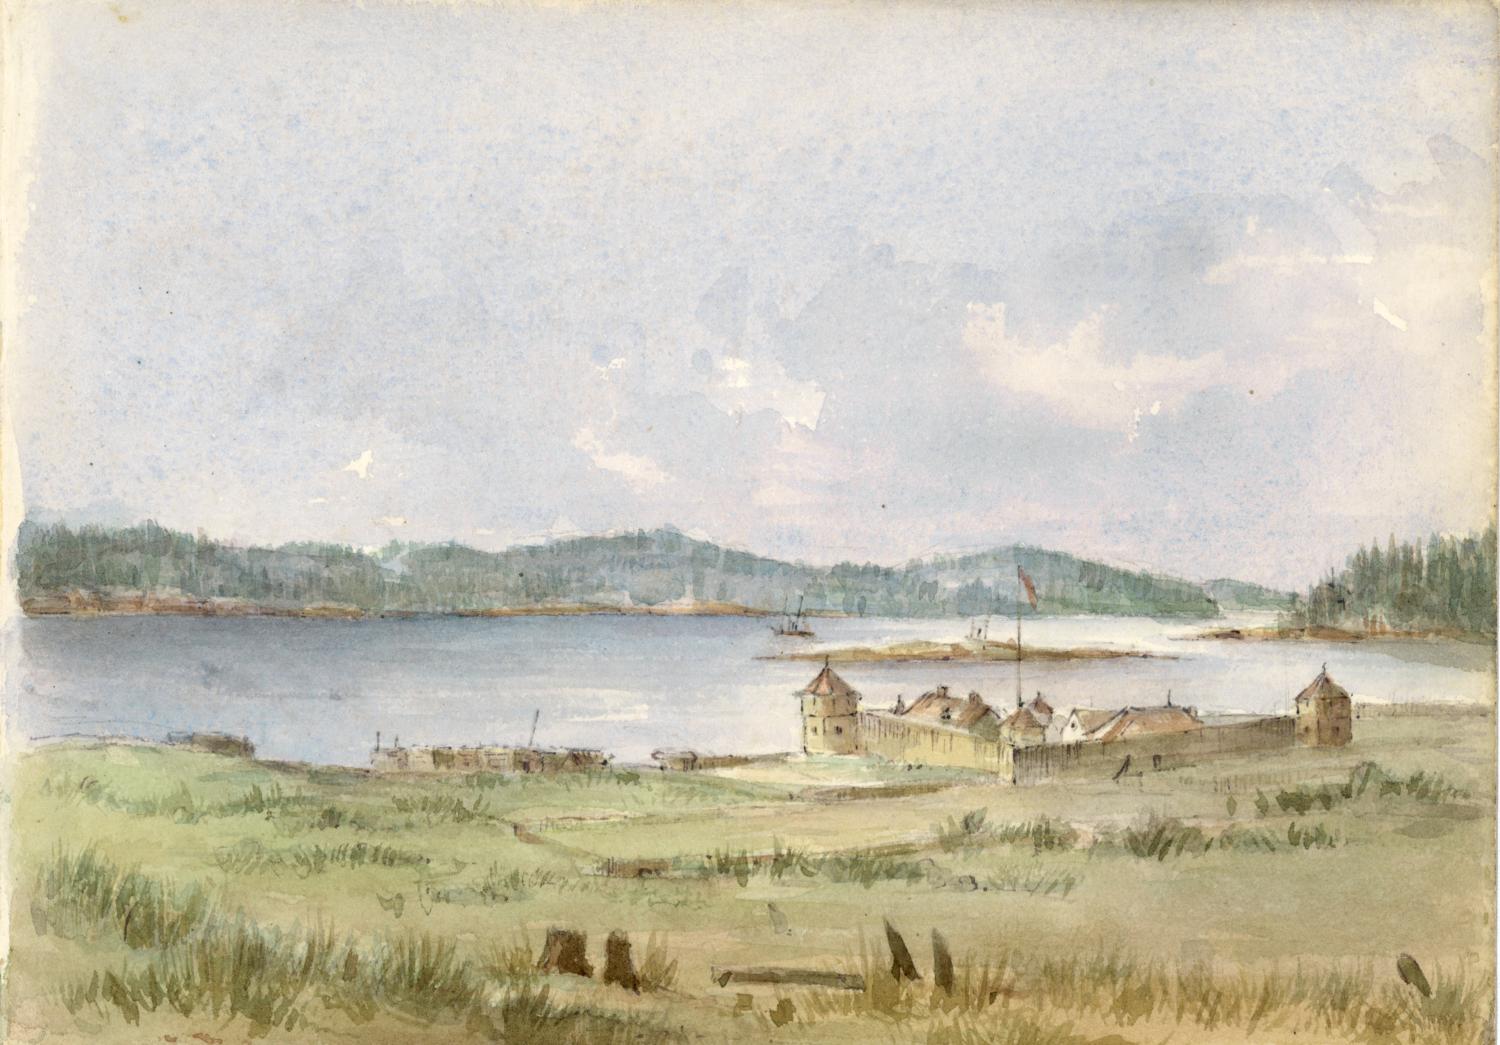 Hudson's Bay Company's establishment at Fort Rupert, with Shell Island and the harbour on the northern side of Vancouver's Island.; Porcher sketchbook.